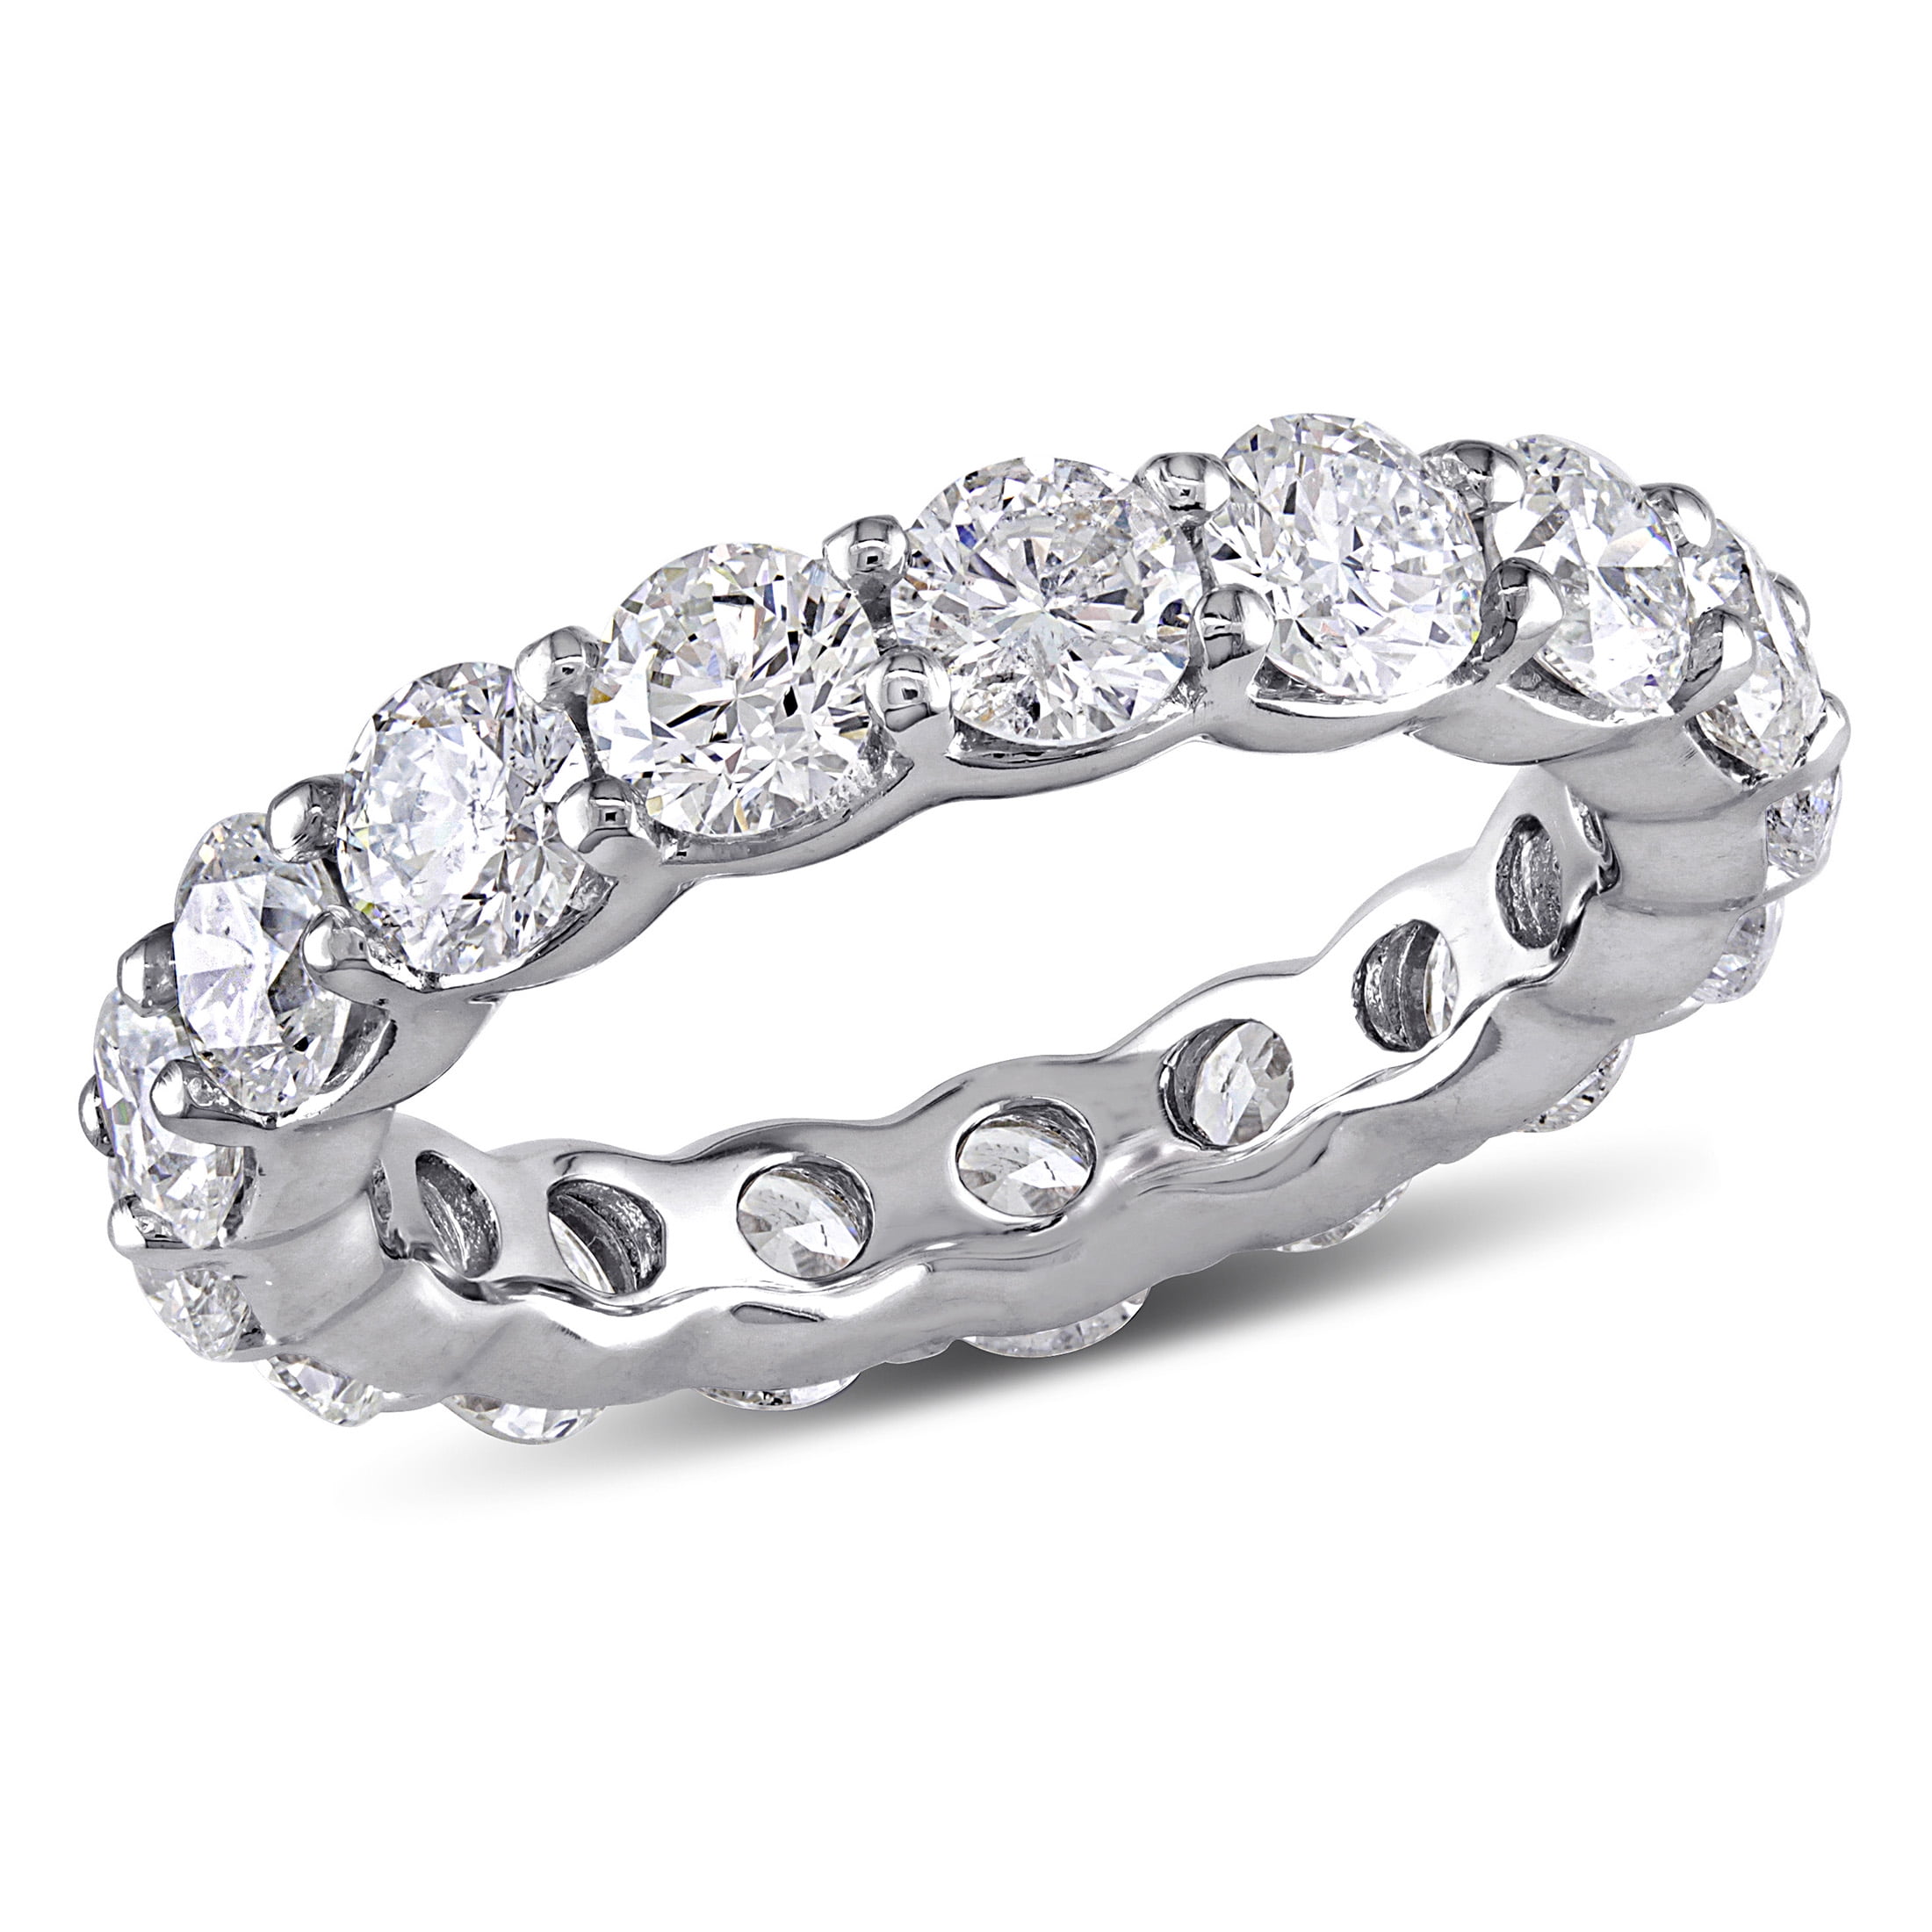 4Ct Emerald Cut Blue Sapphire Diamond Cocktail Eternity Band 14K White Gold Over